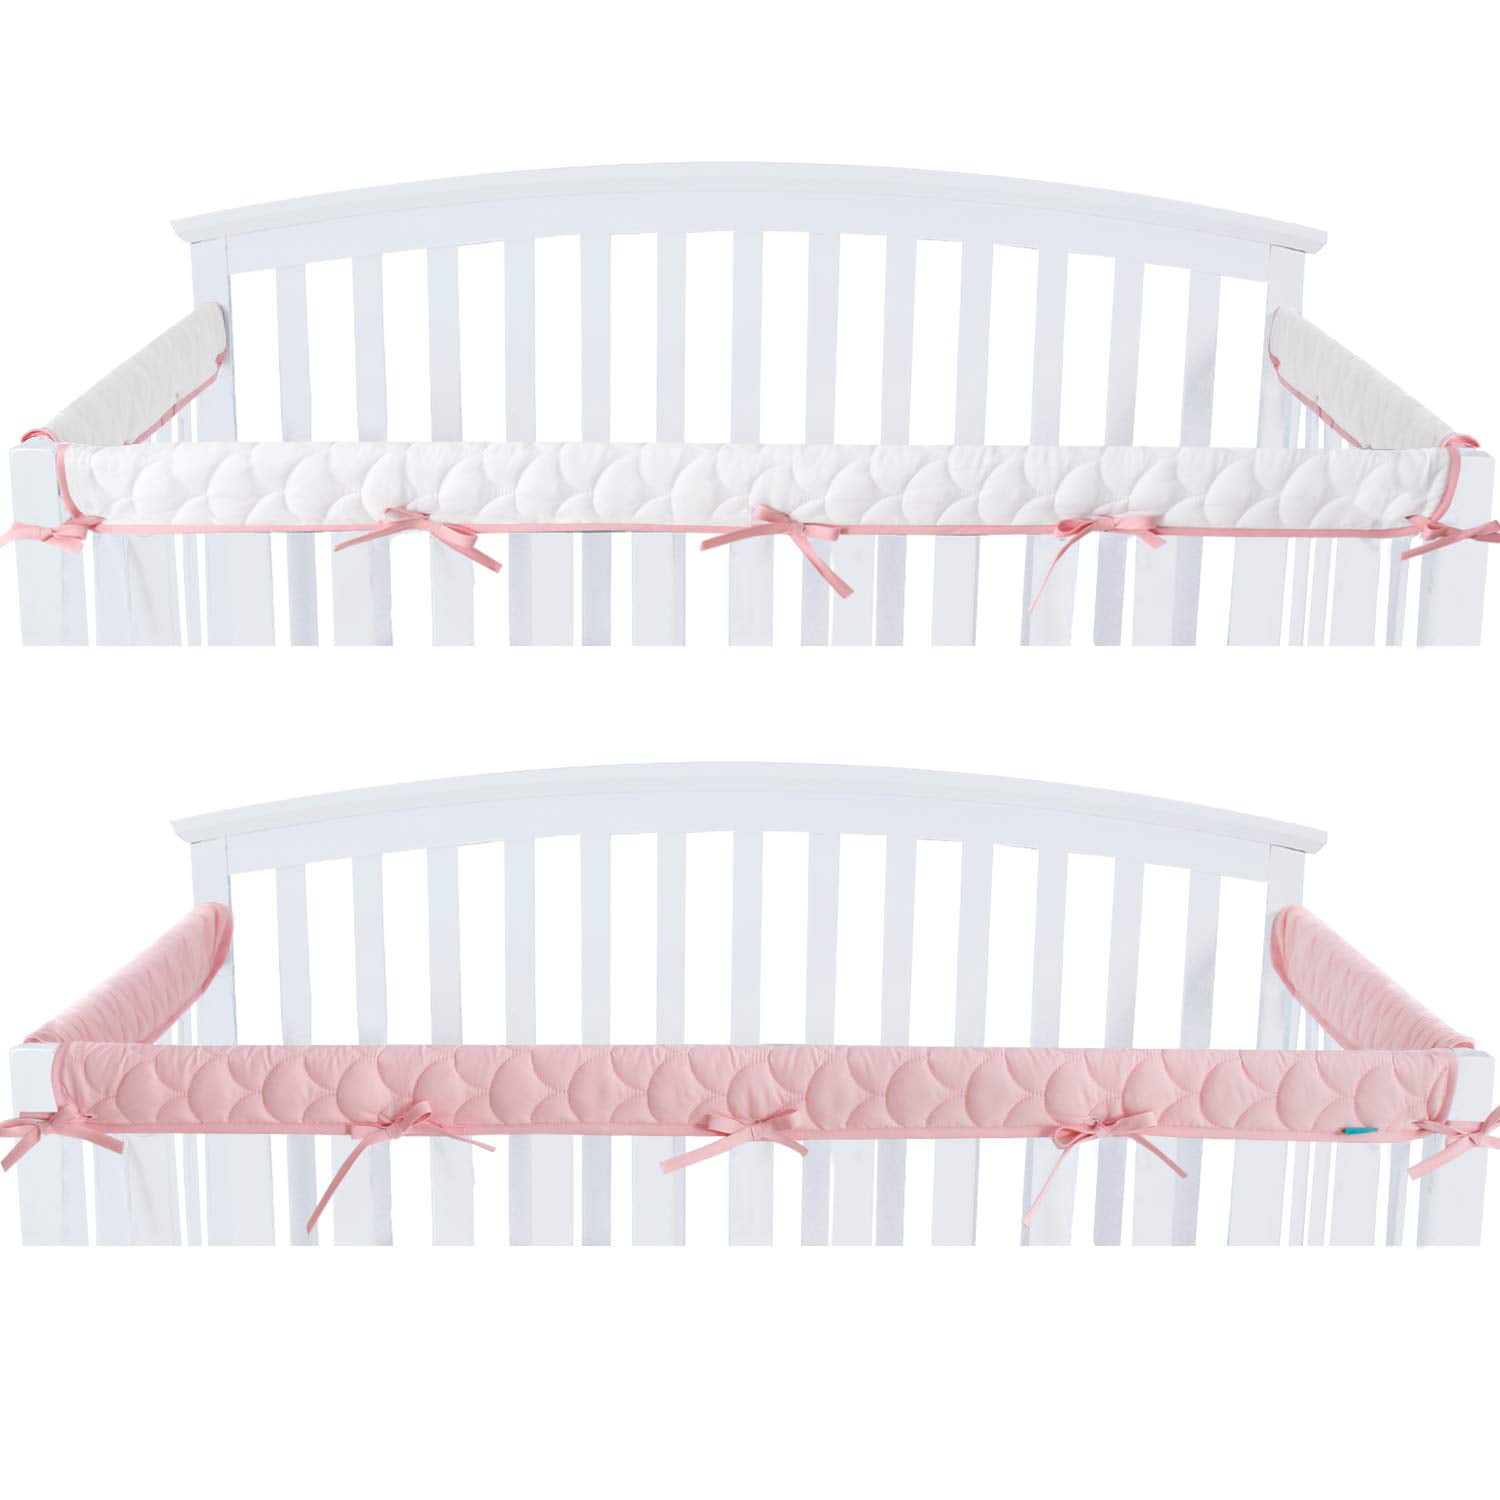 Reversible Measuring Up to 18 Around 100% Silky Soft Microfiber Polyester Blue/White TILLYOU 1-Pack Padded Baby Crib Rail Cover Protector Safe Teething Guard Wrap for Long Front Crib Rails 